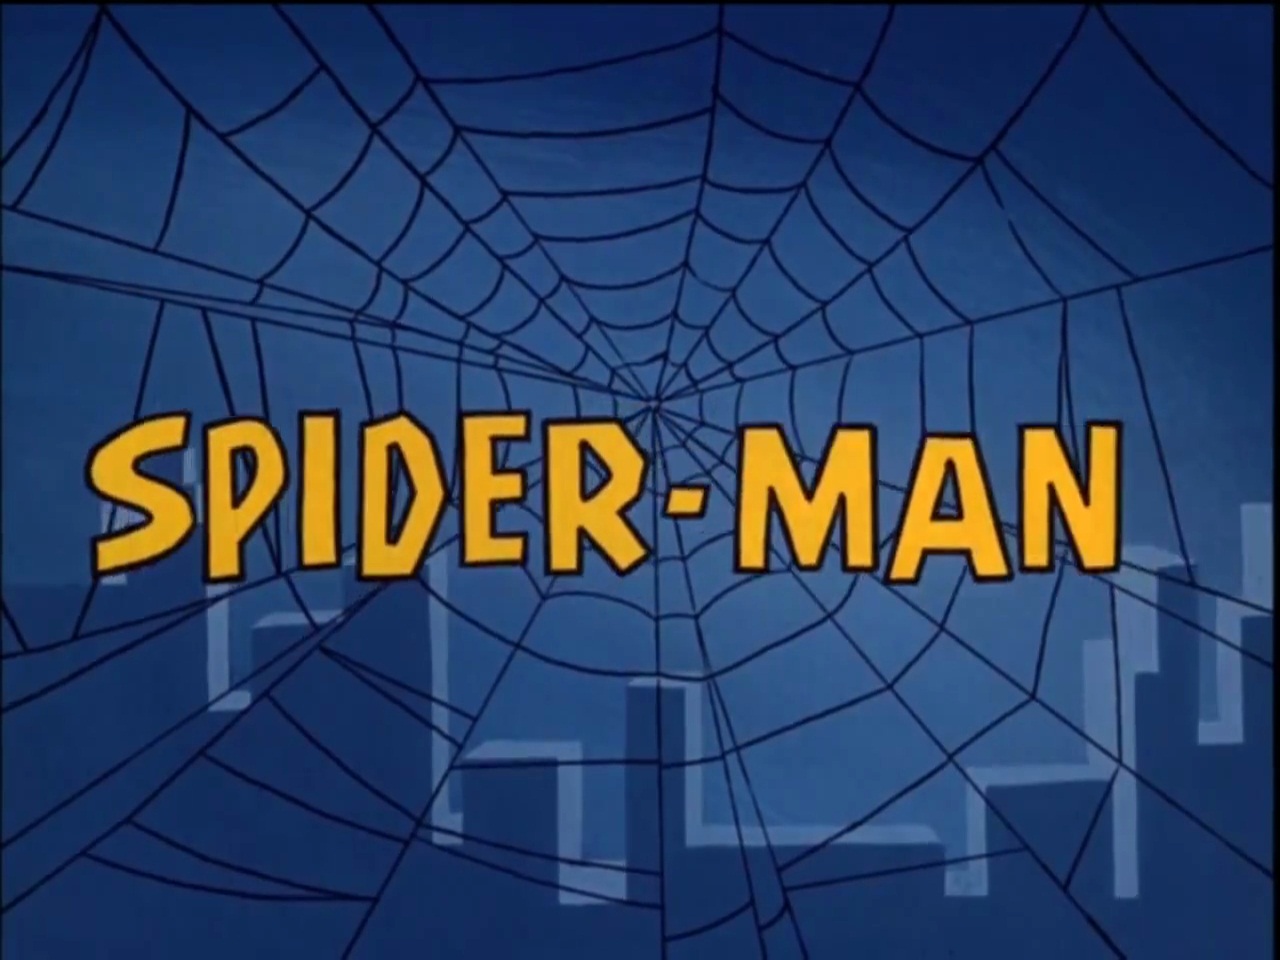 Spiderman” Theme Song (Words by Paul Francis Webster) |  thingsthatmadeanimpression